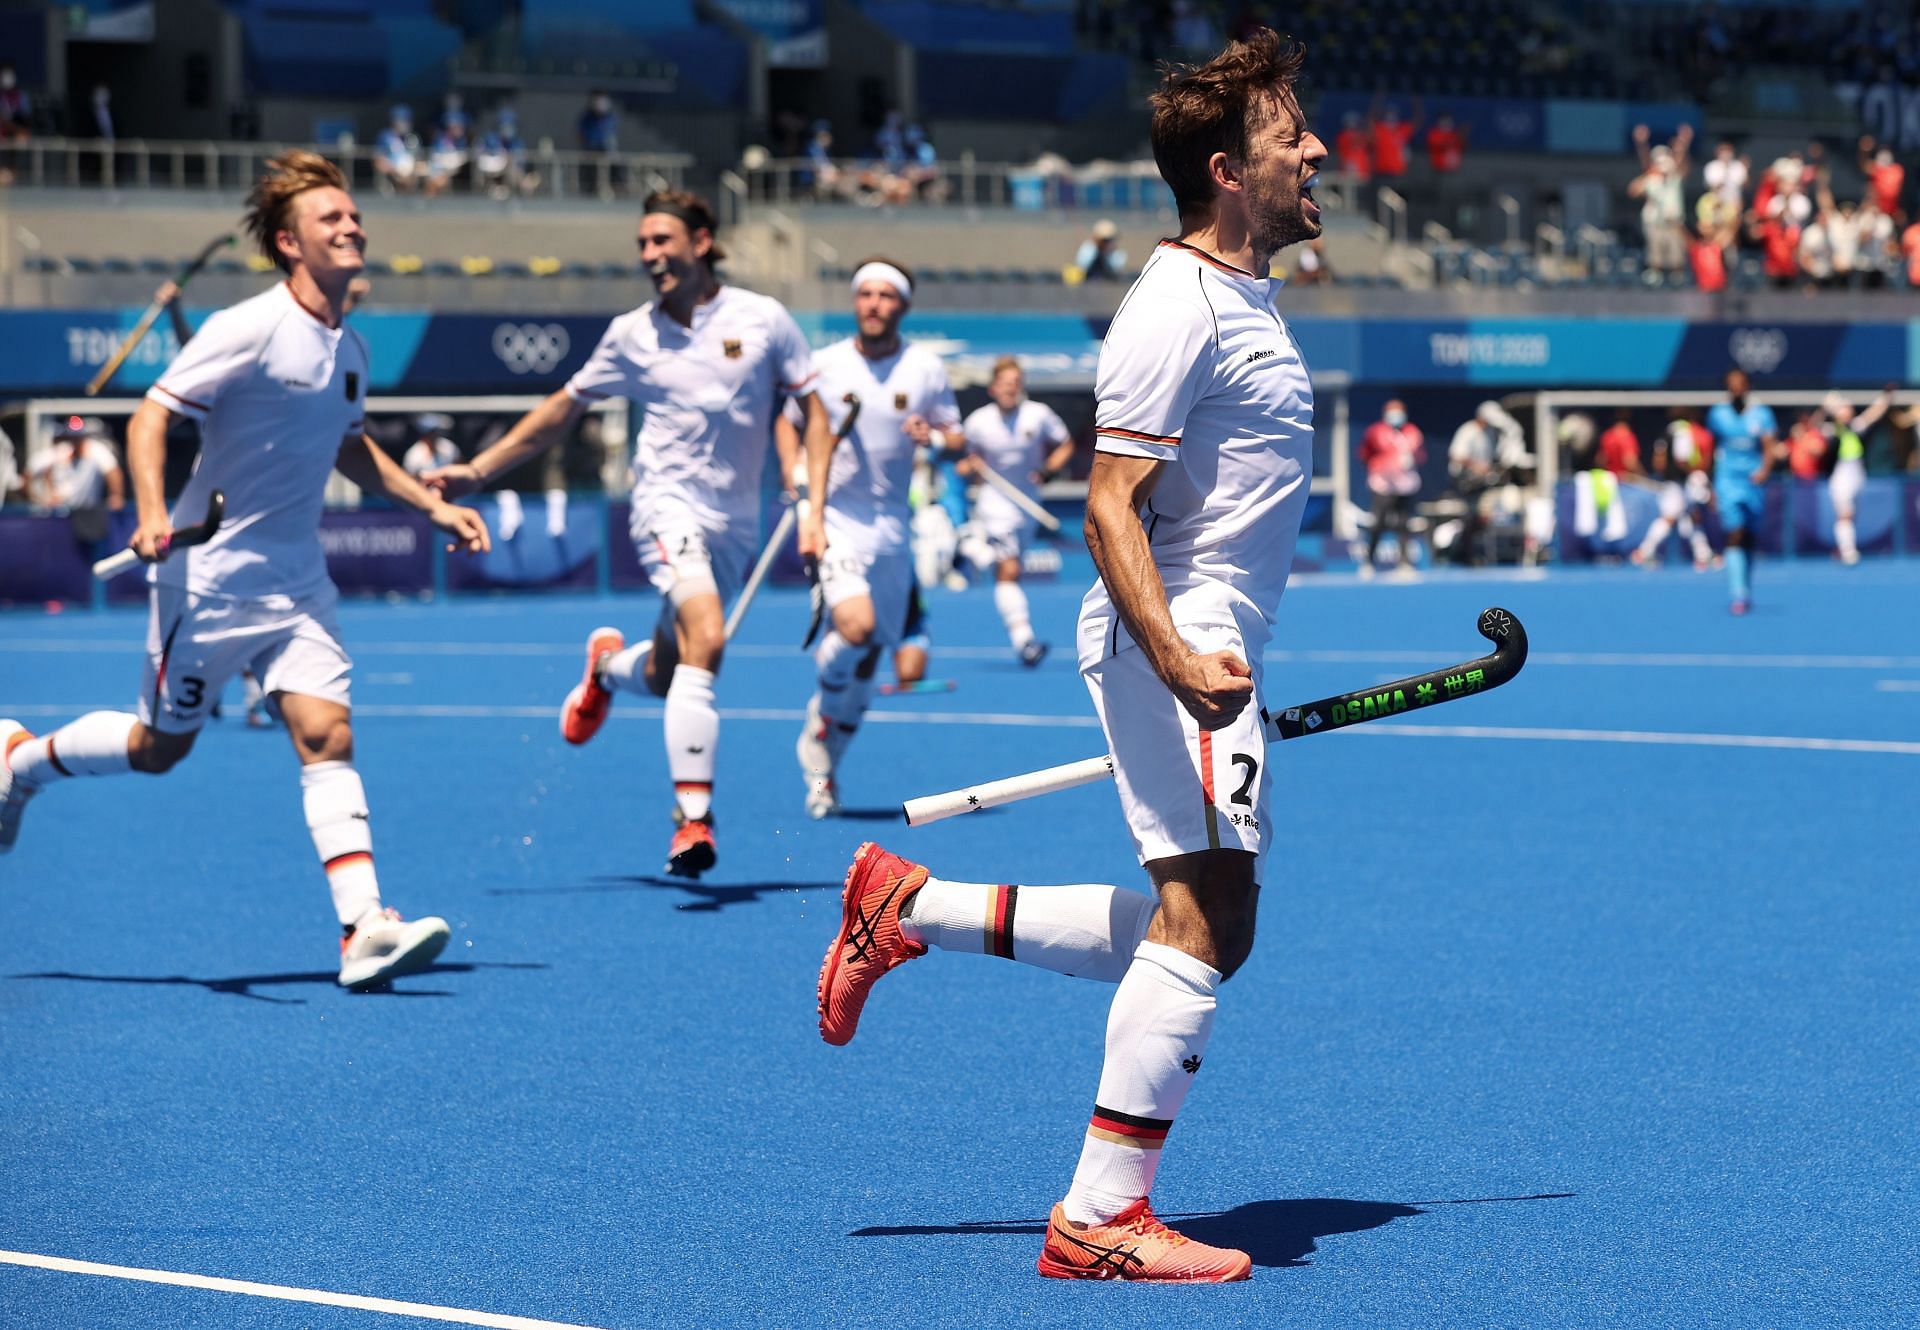 The Germans are one of the teams to beat at the 2023 Hockey World Cup